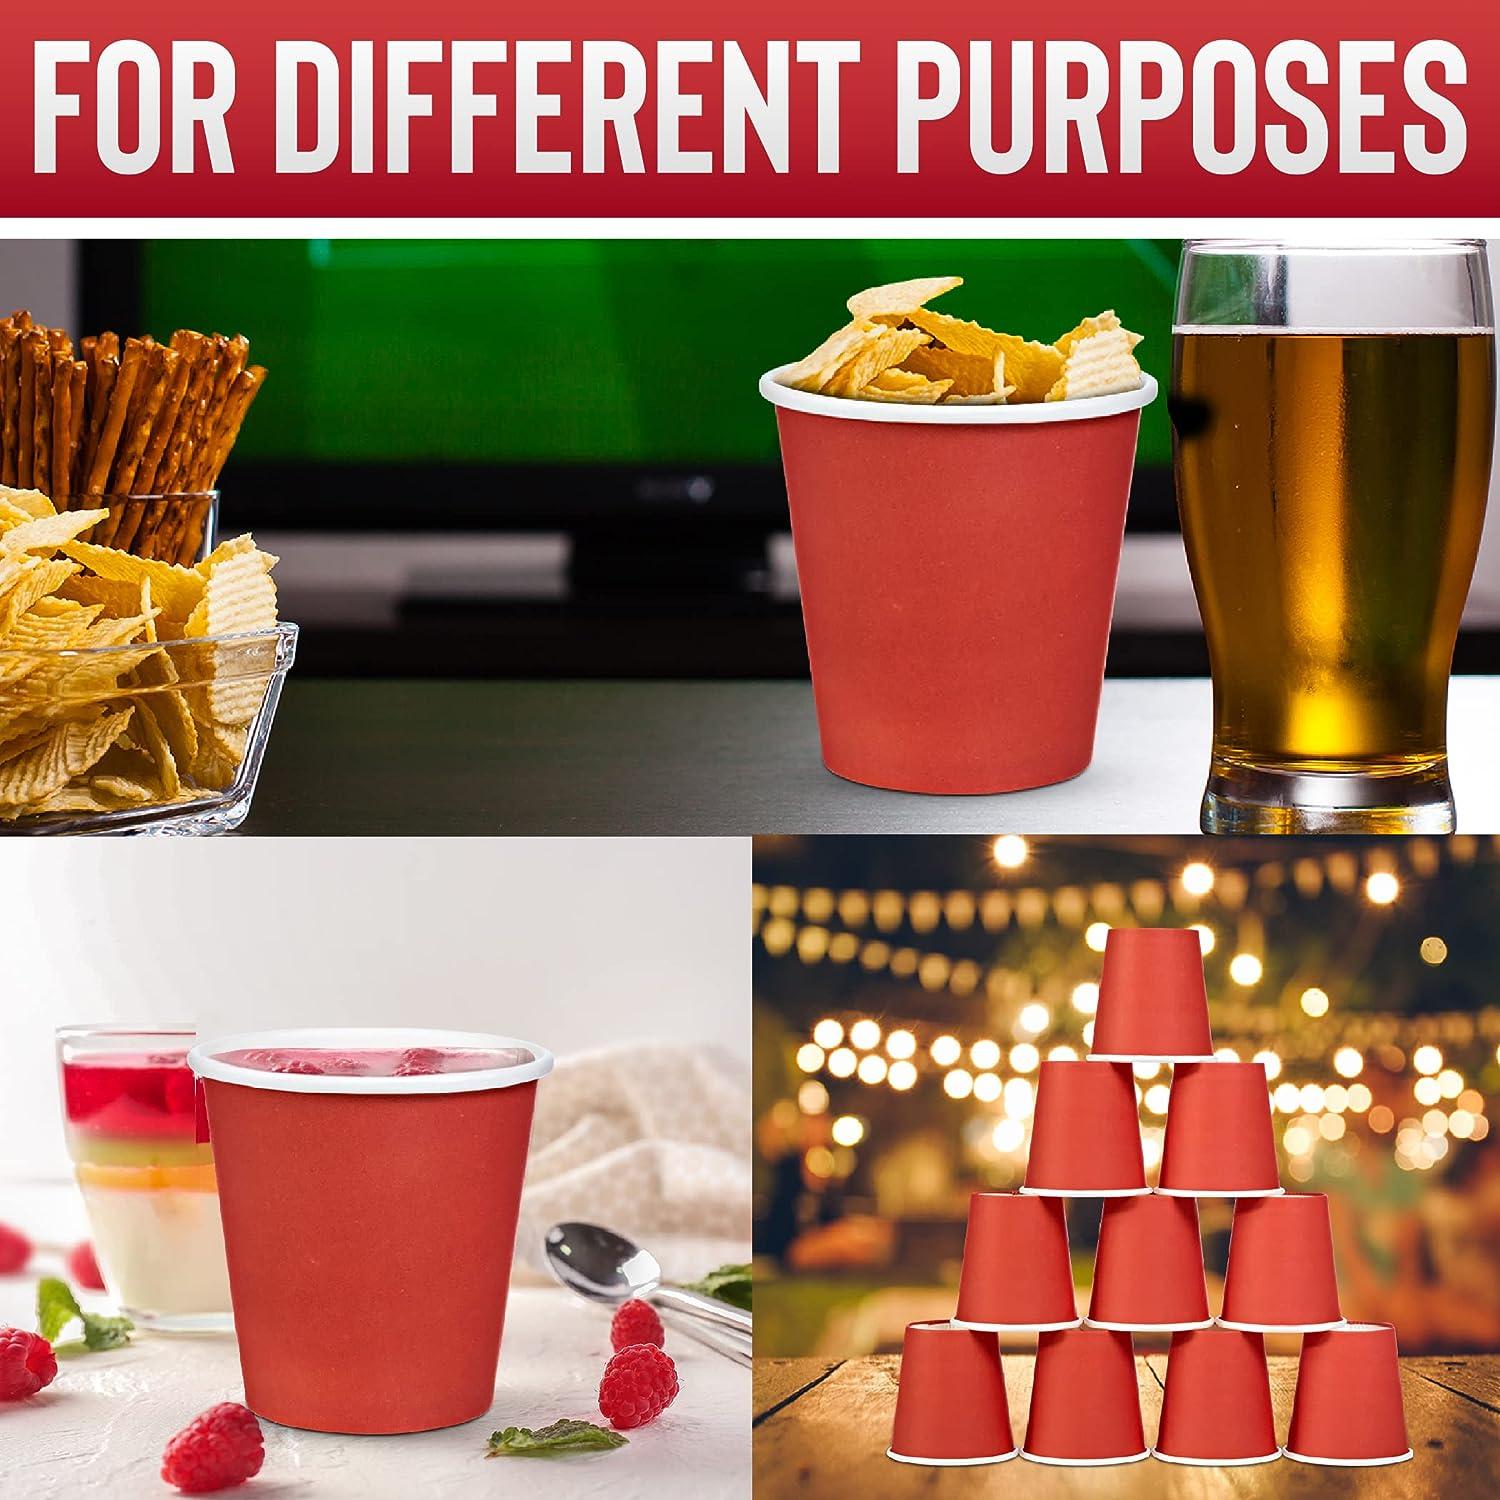 Disposable Shot Glasses - No Brittle Cracking Hard Plastic - 2oz Small Cute  Mini Red Paper Solo Cup For Jello Shots, Party Games, Wine Tasting